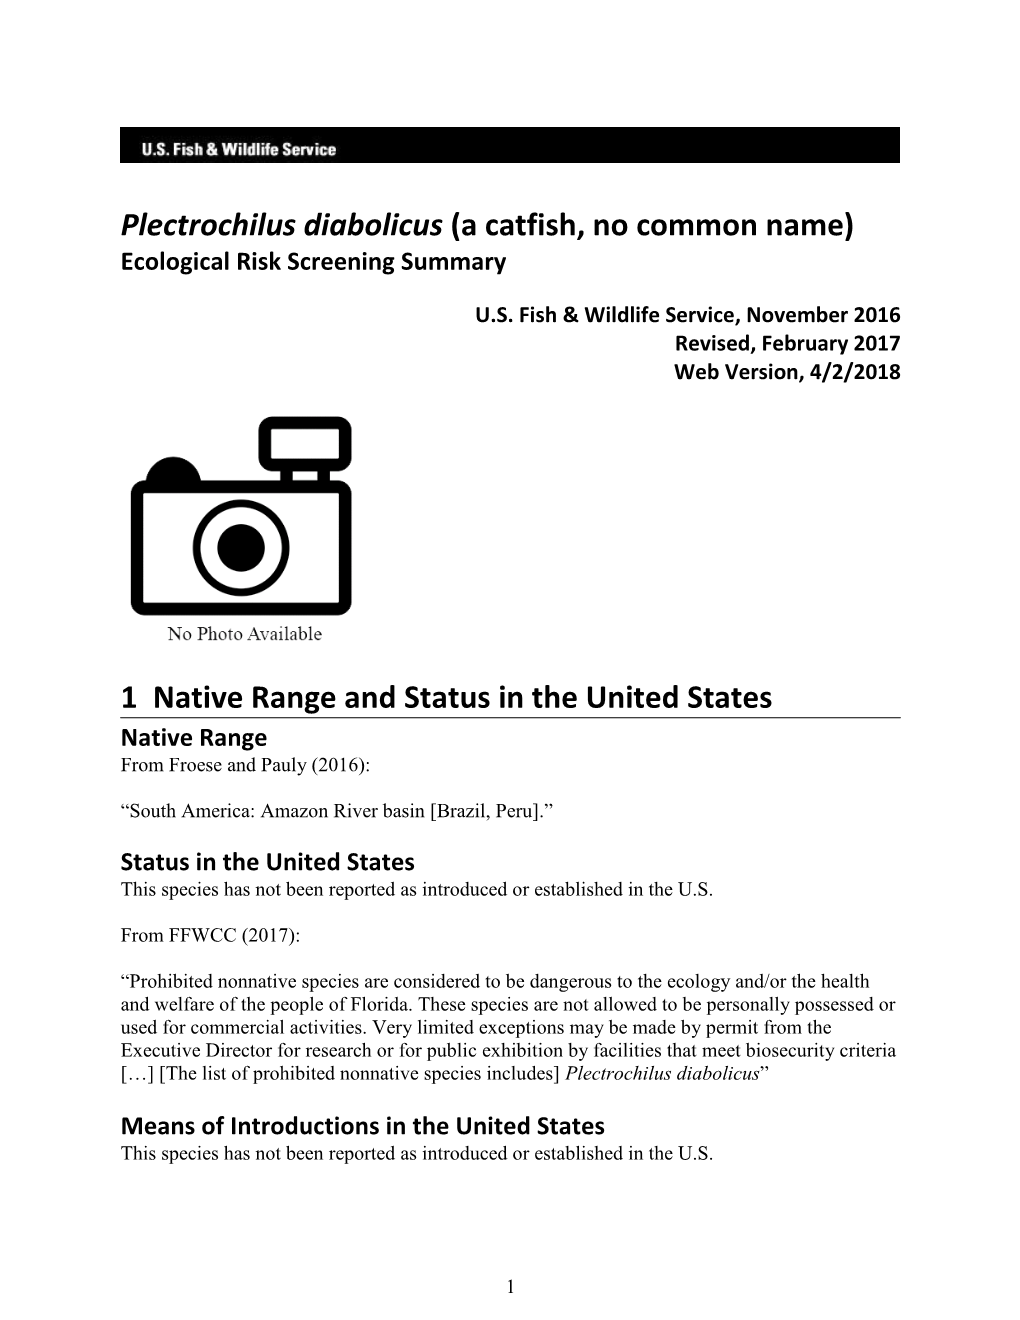 Plectrochilus Diabolicus (A Catfish, No Common Name) Ecological Risk Screening Summary